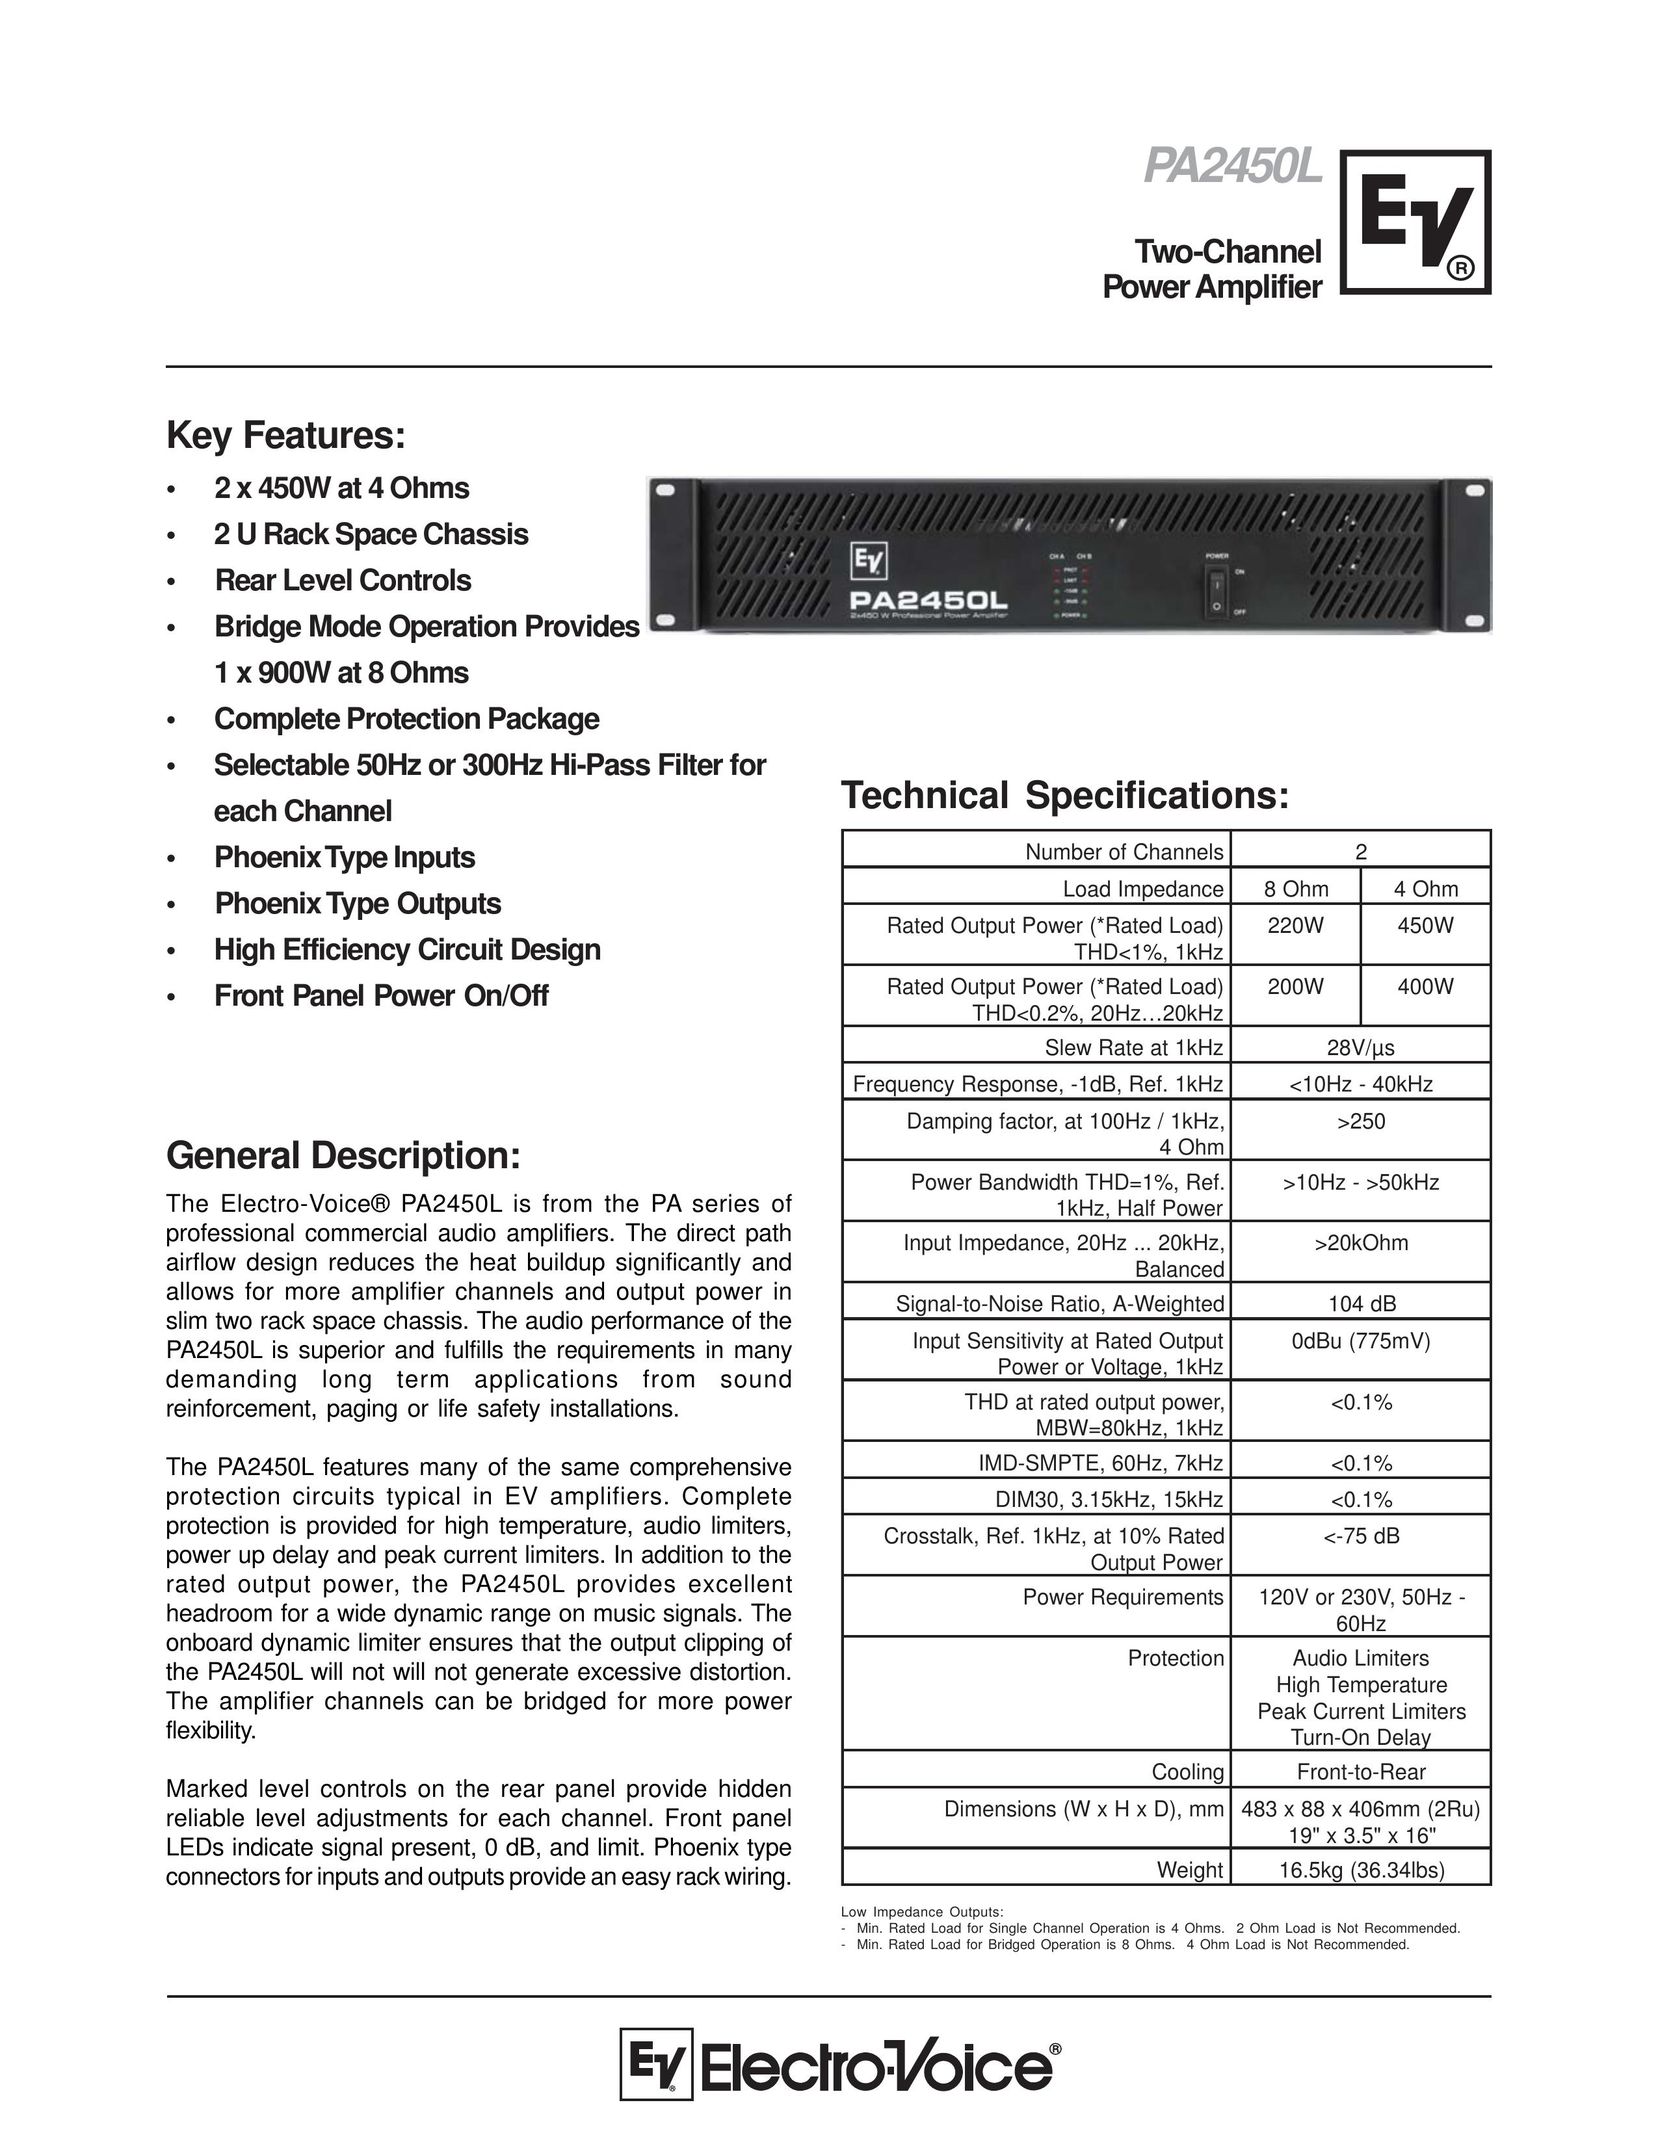 Electro-Voice PA2450 Stereo Amplifier User Manual